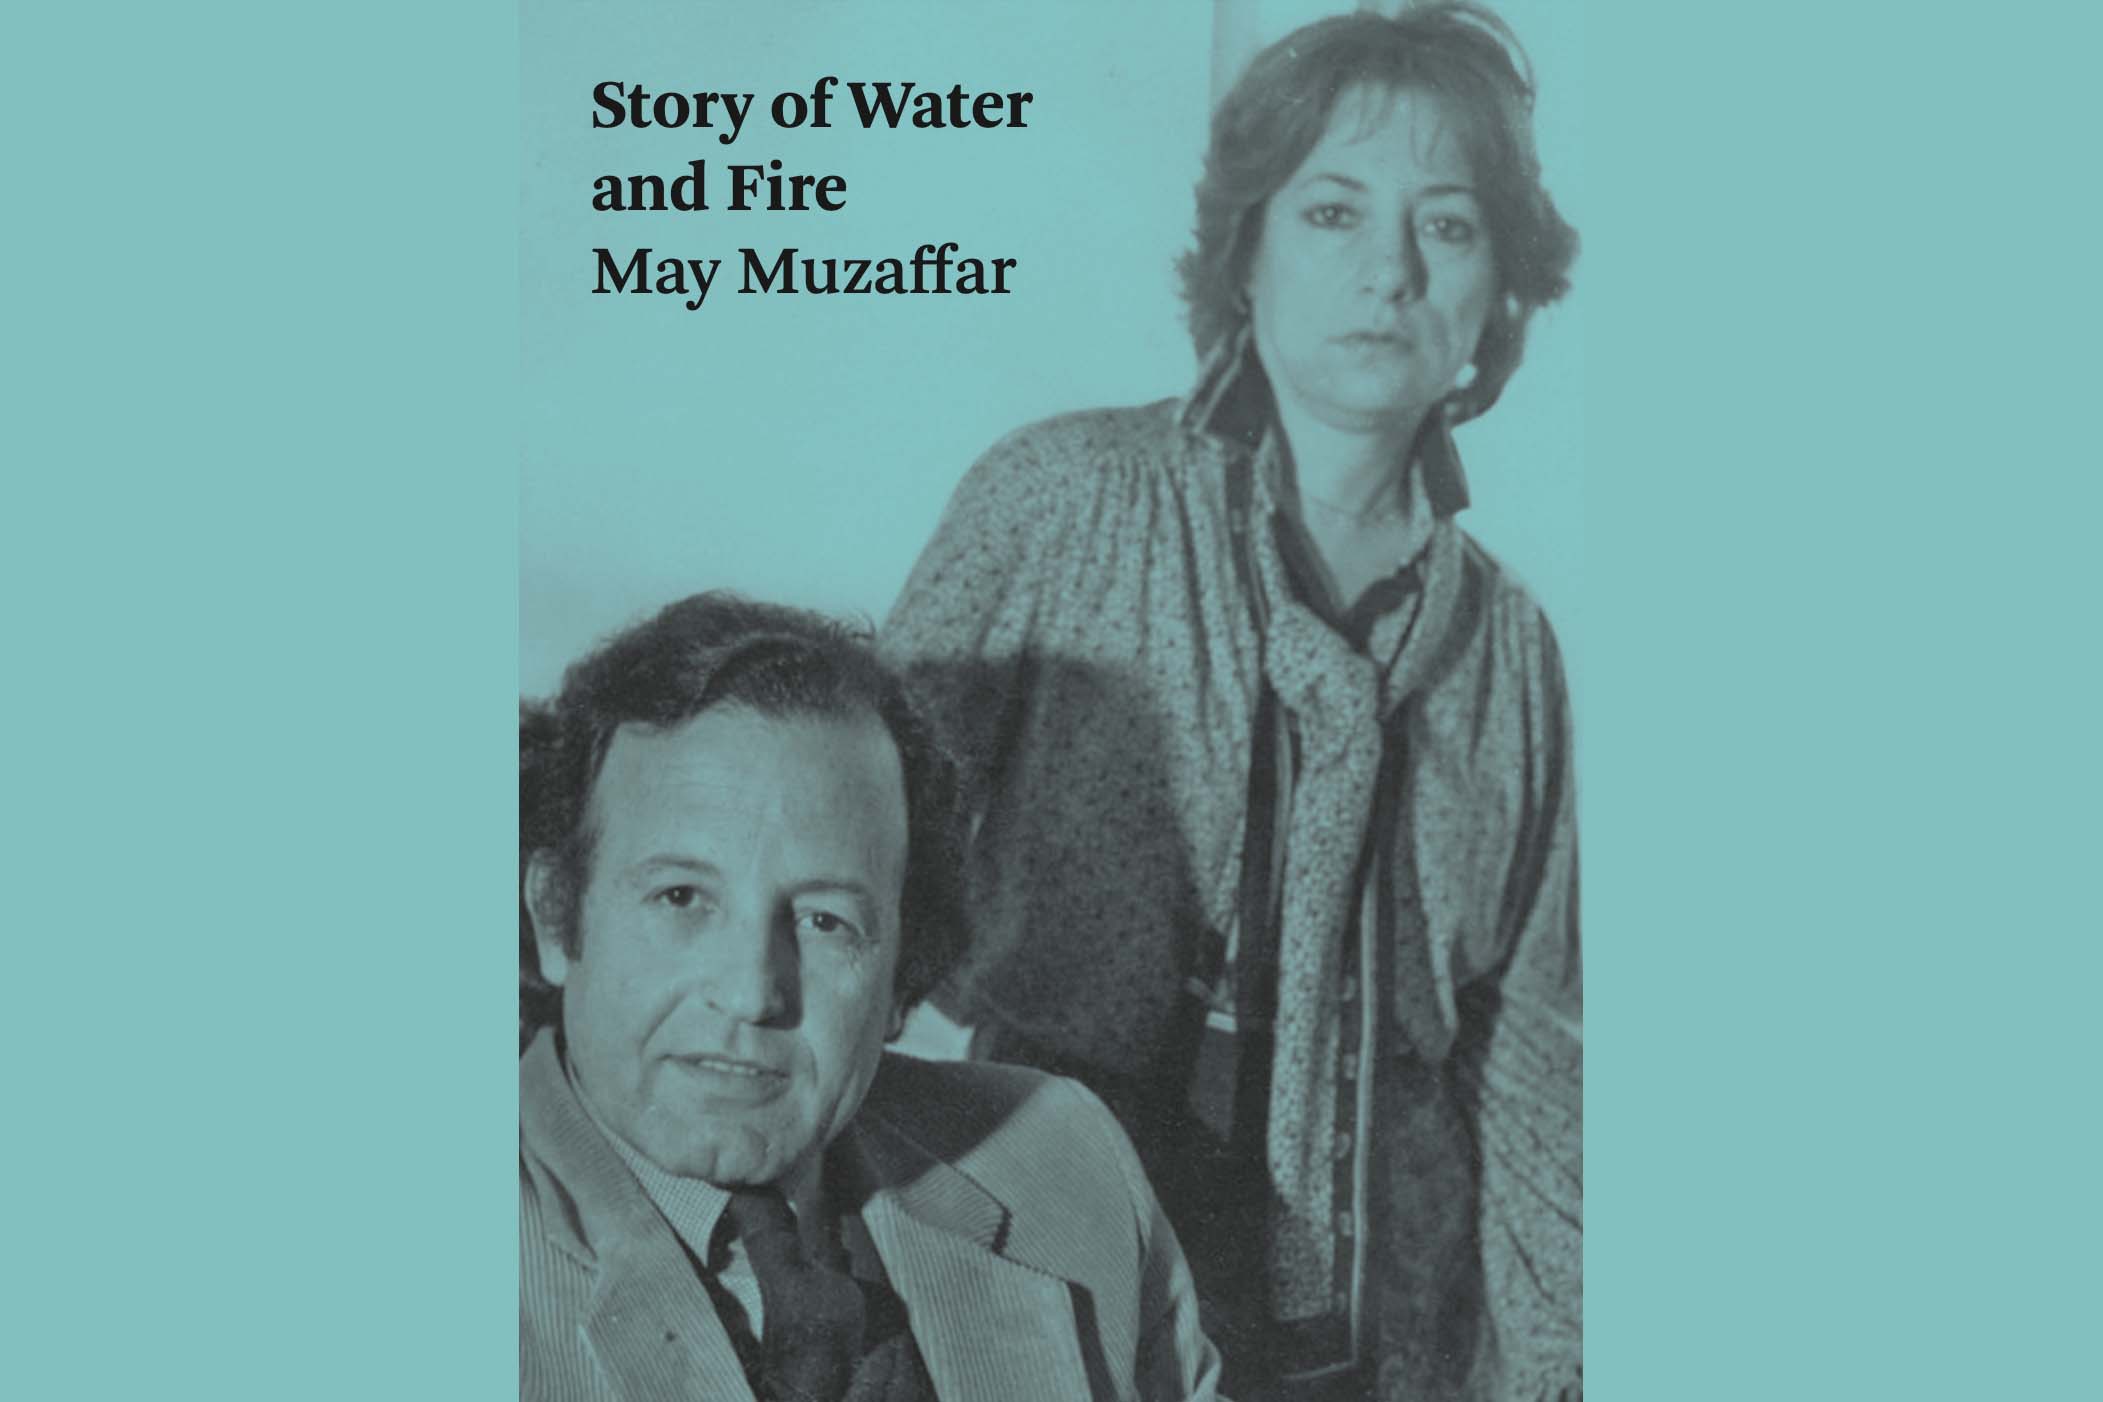 Story of Water and Fire by May Muzaffar